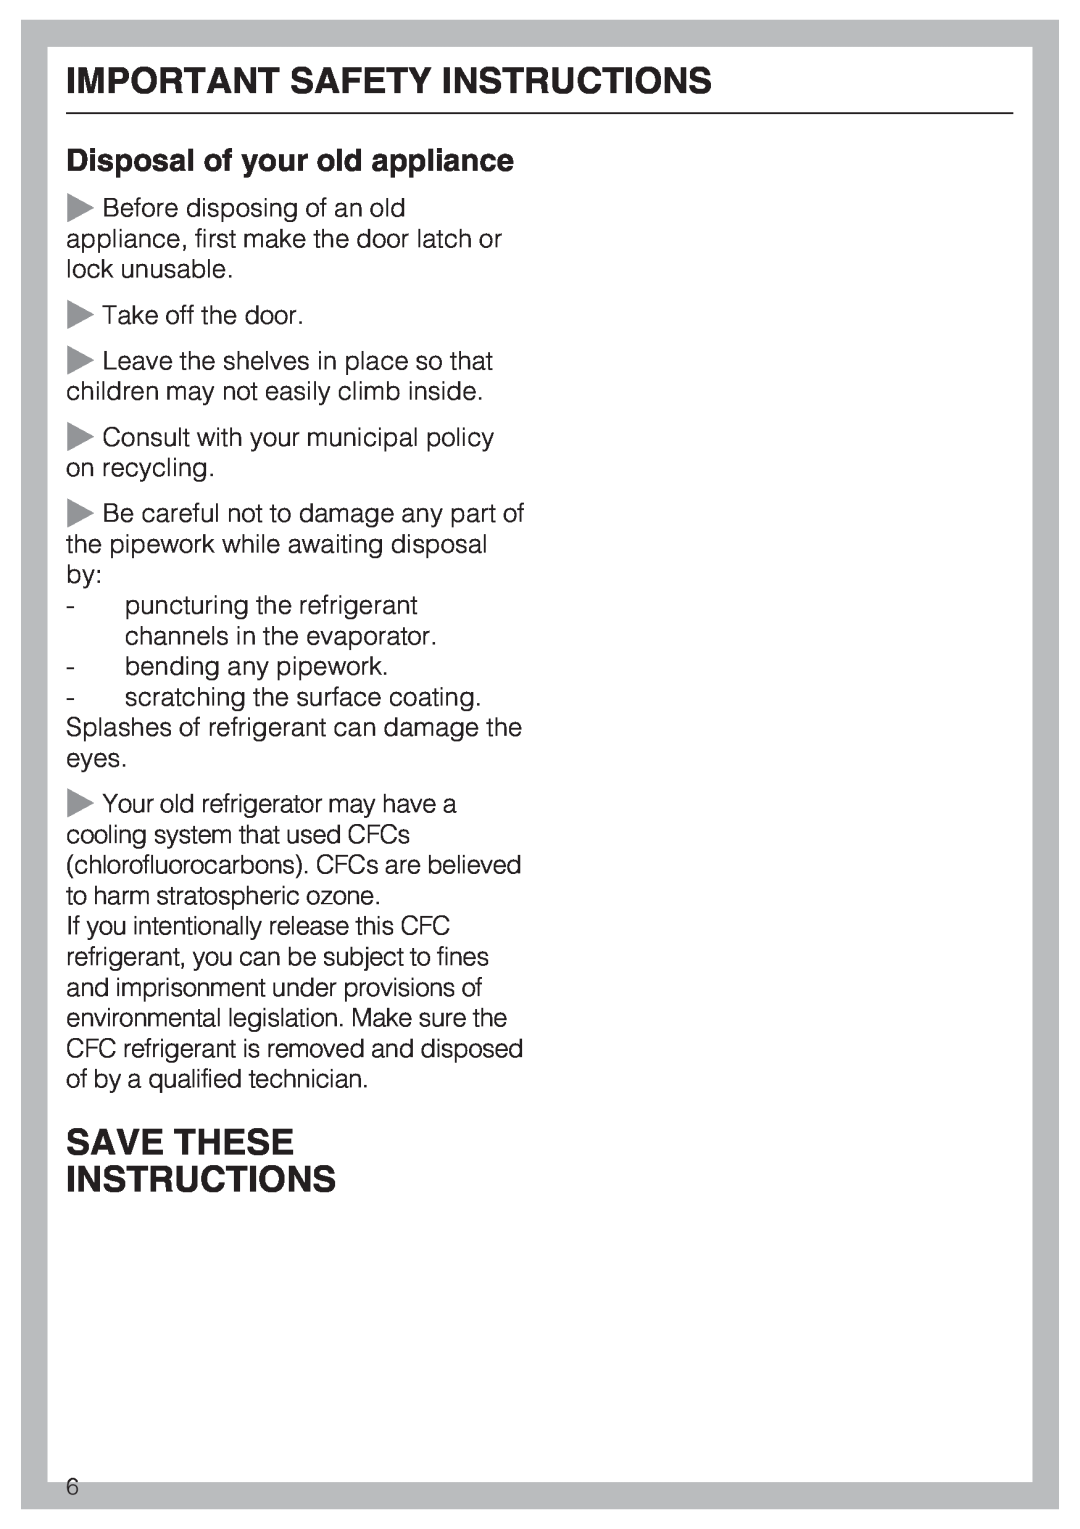 Miele K1911SF, K1801SF, K1901SF Save These Instructions, Disposal of your old appliance, Important Safety Instructions 